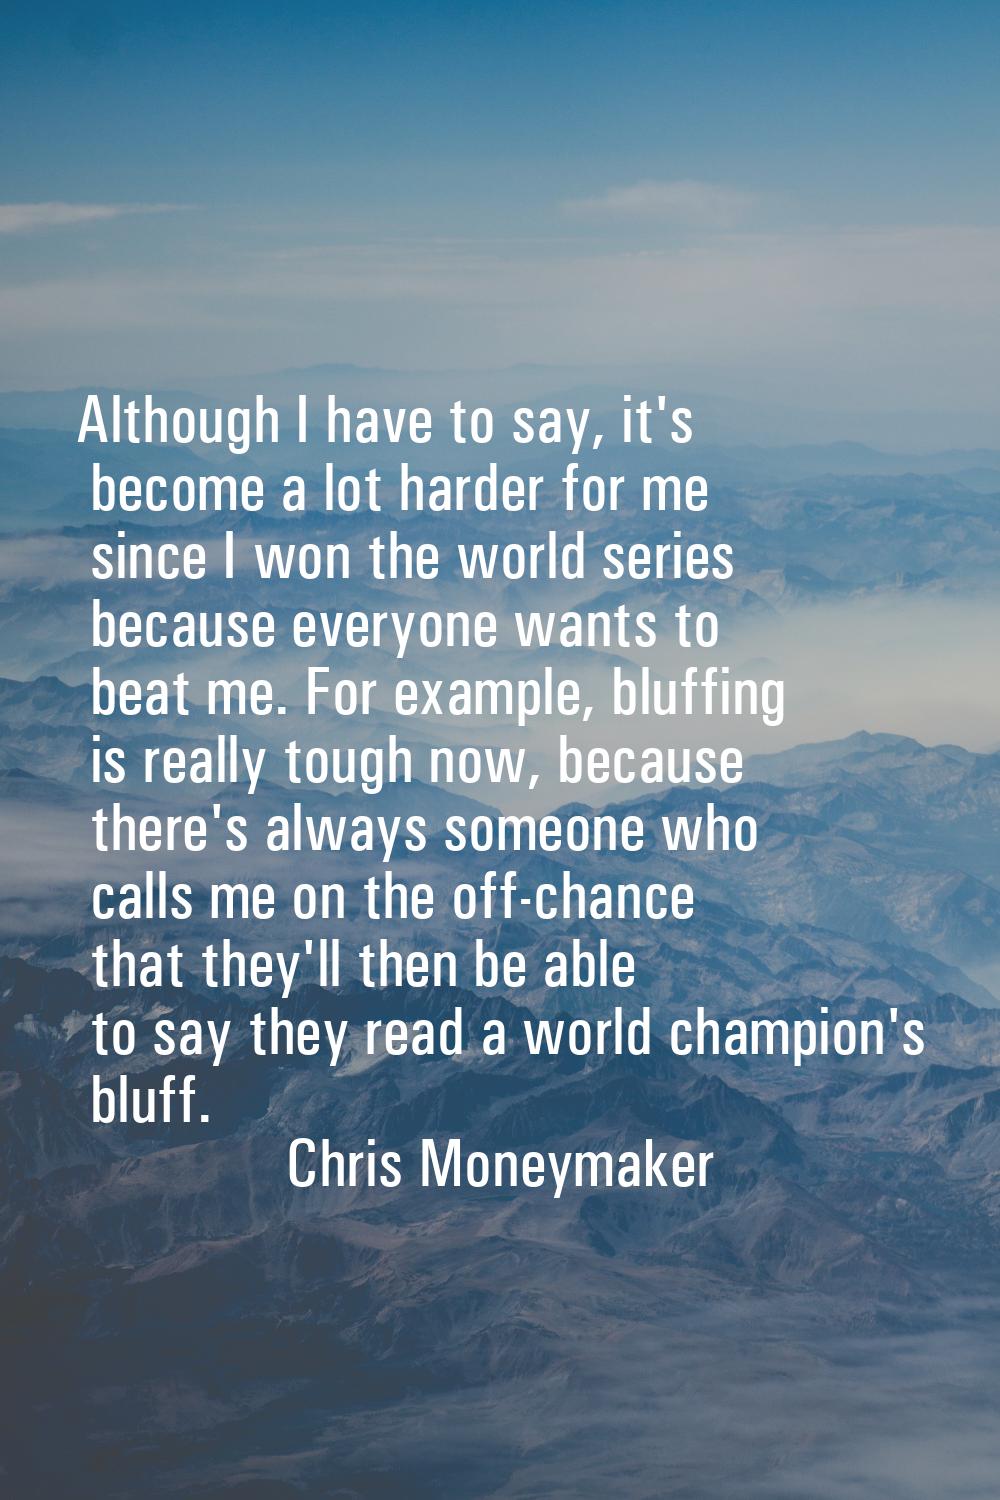 Although I have to say, it's become a lot harder for me since I won the world series because everyo